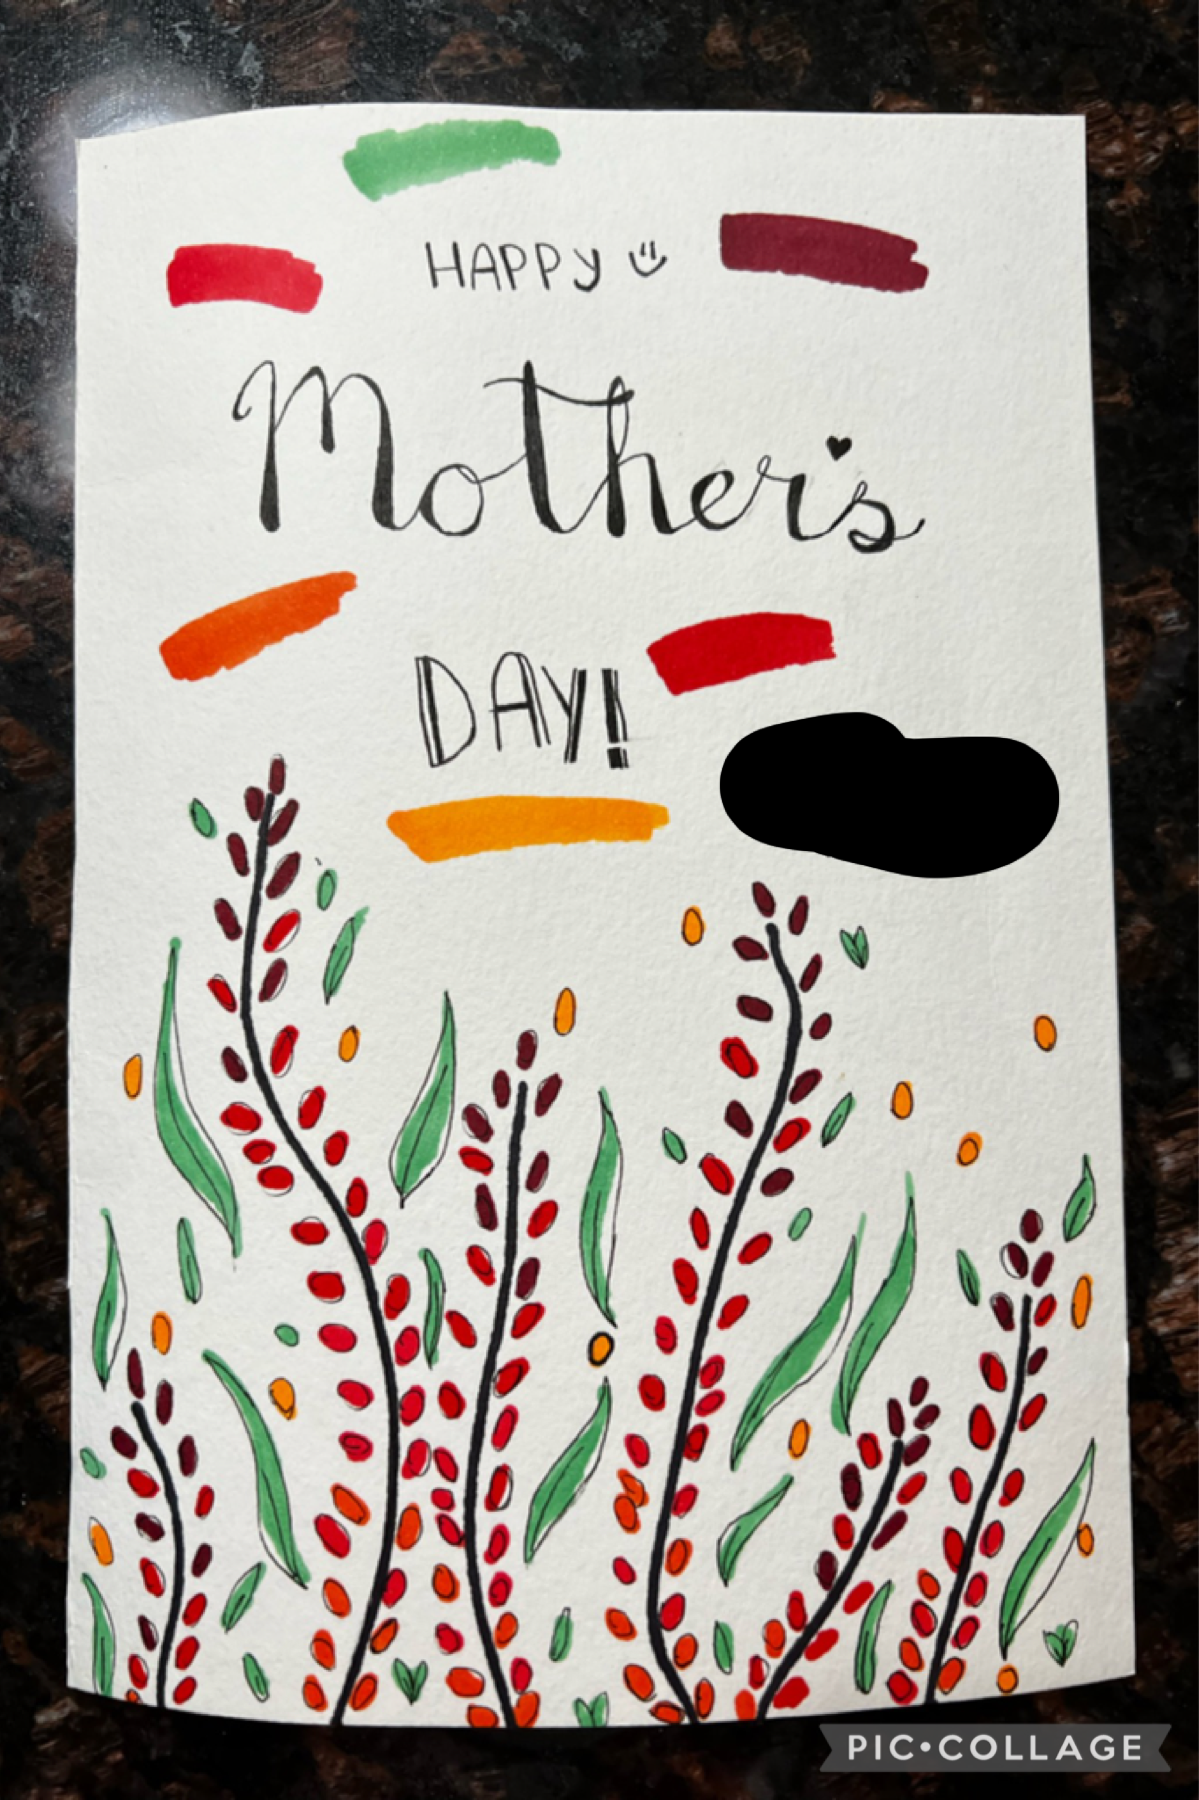 ❤️tap❤️
HAPPY (late) MOTHERS DAY! I made this for my mom :D